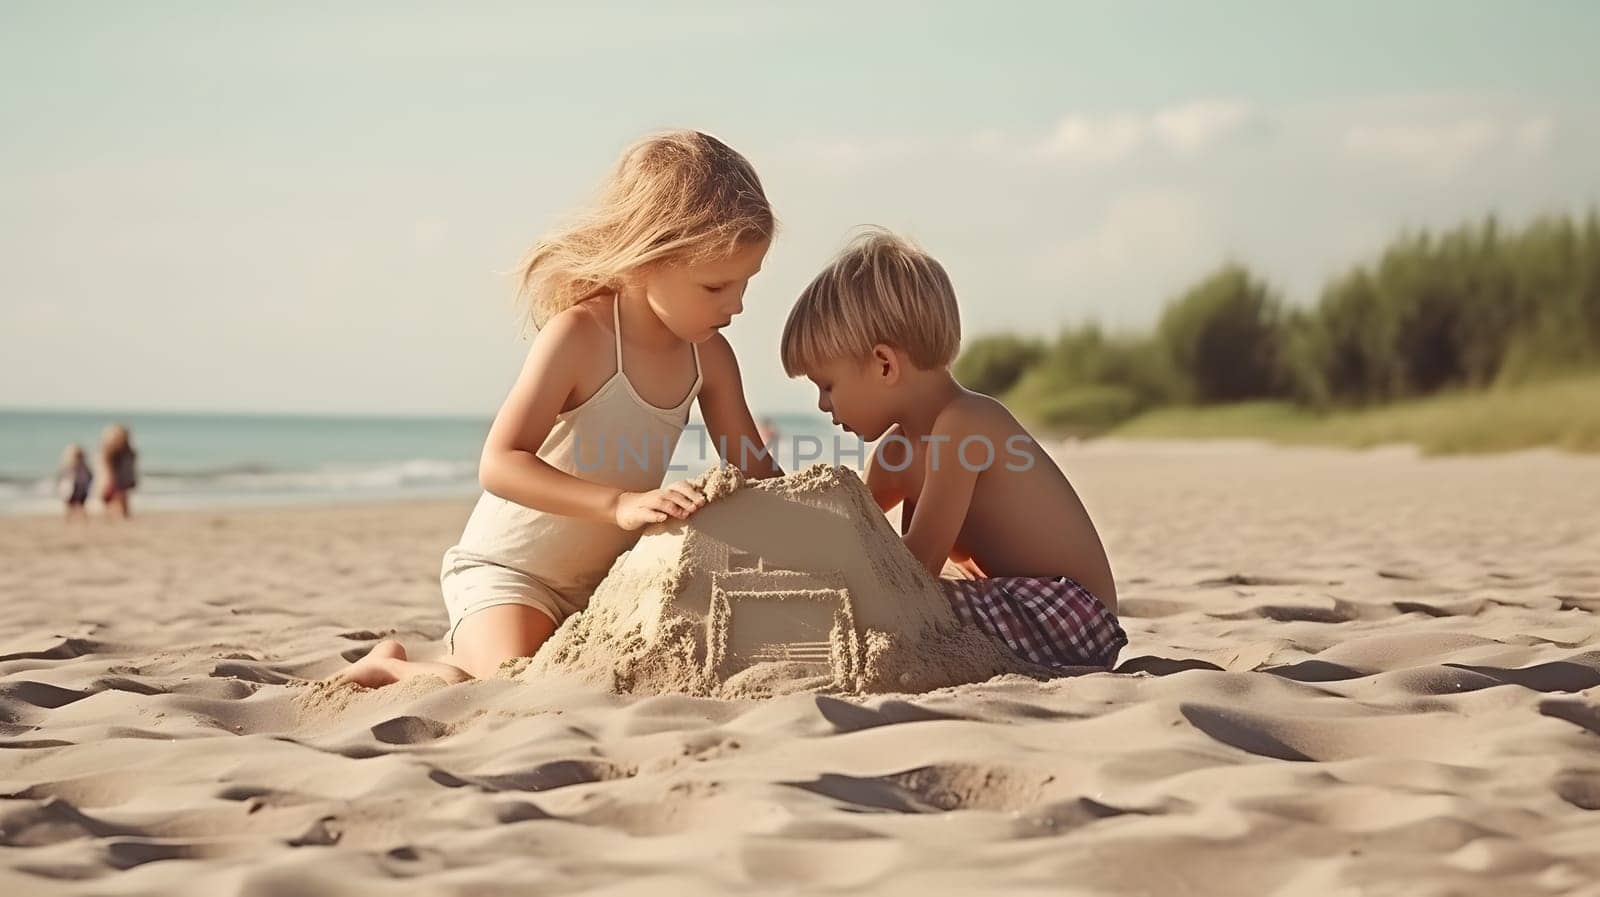 Children making sand castles on the beach. Neural network generated in May 2023. Not based on any actual person, scene or pattern.